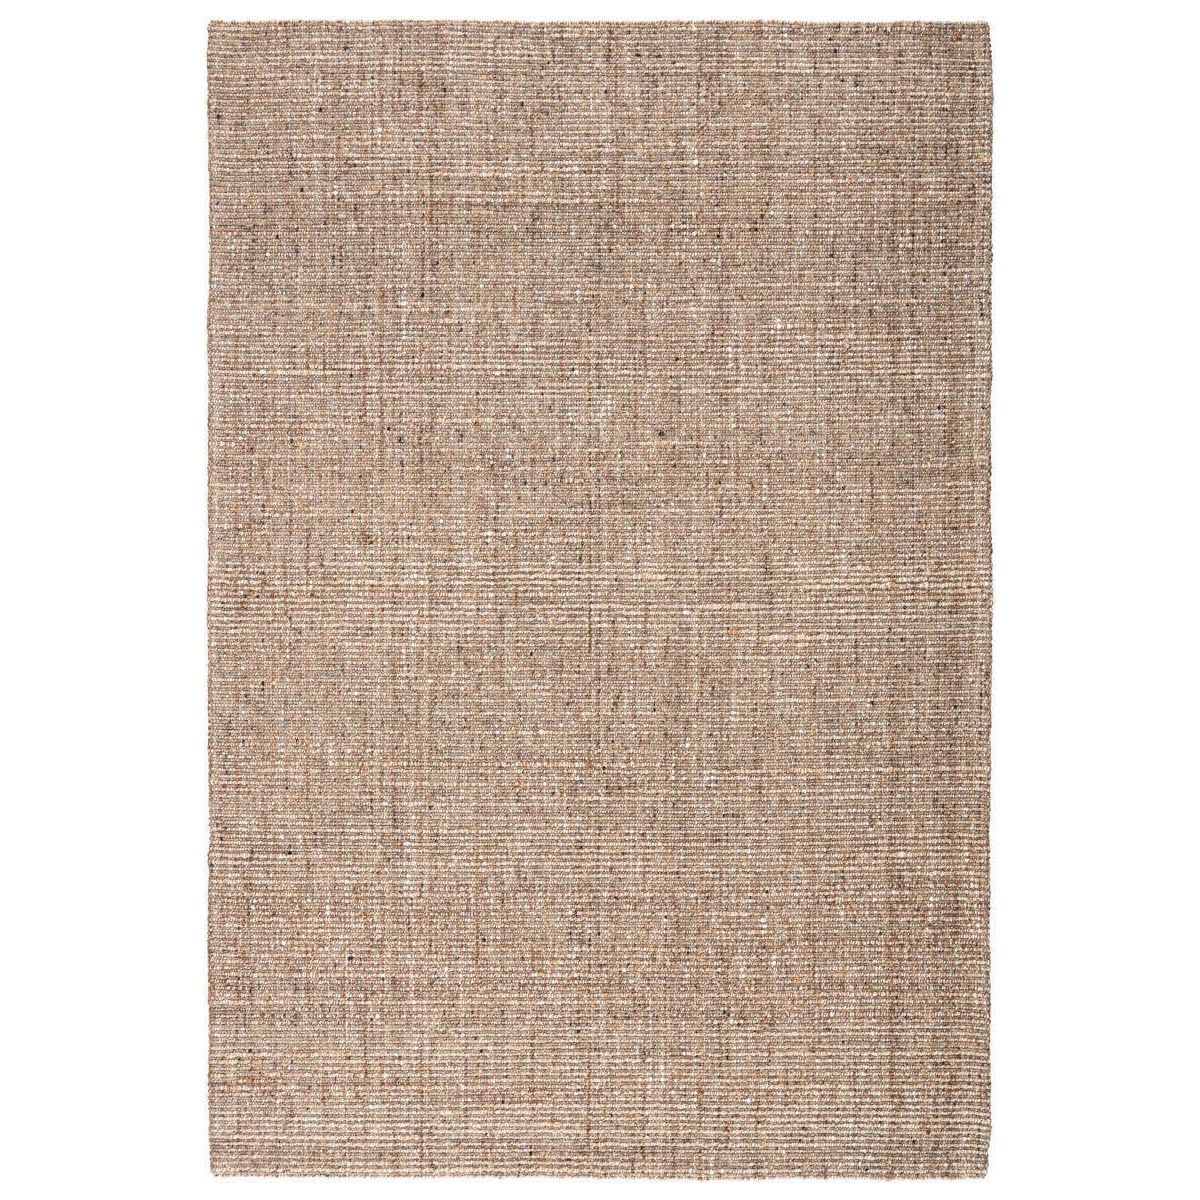 The Monterey Sutton Rug features luxury natural styles with a blend of grass fibers and soft yarns. Handwoven of jute, wool, polyester, and viscose, the sophisticated Sutton area rug boasts a versatile, heathered design. The effortless, clean look of this tan and black rug complements any modern space. Amethyst Home provides interior design services, furniture, rugs, and lighting in the Miami metro area.